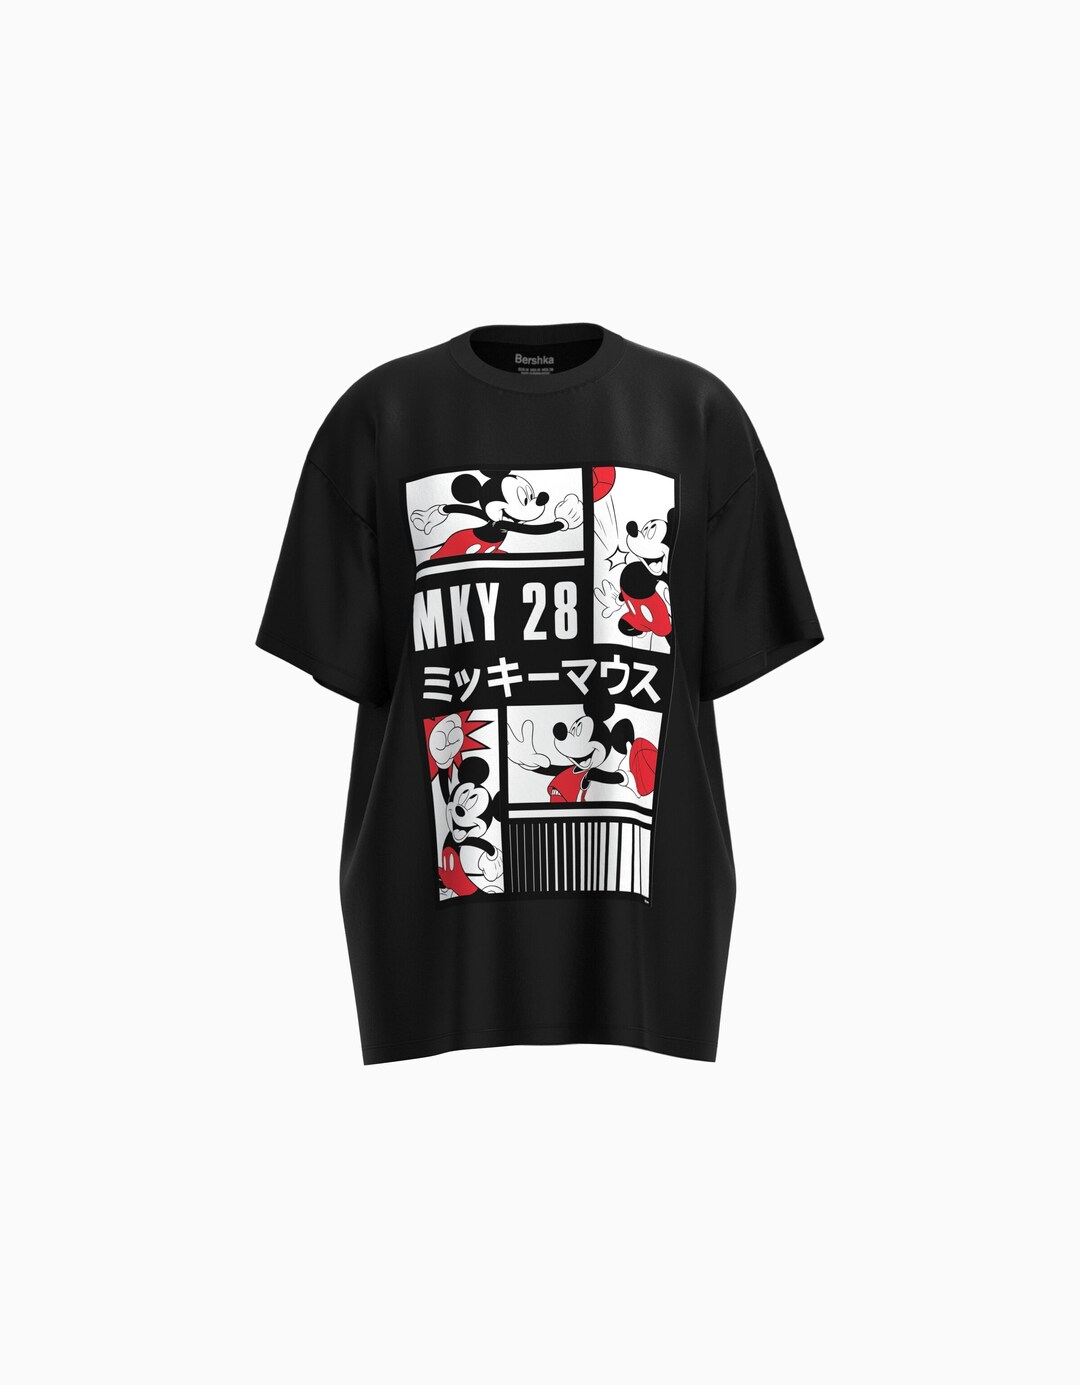 Mickey Mouse print oversized fit short sleeve T-shirt